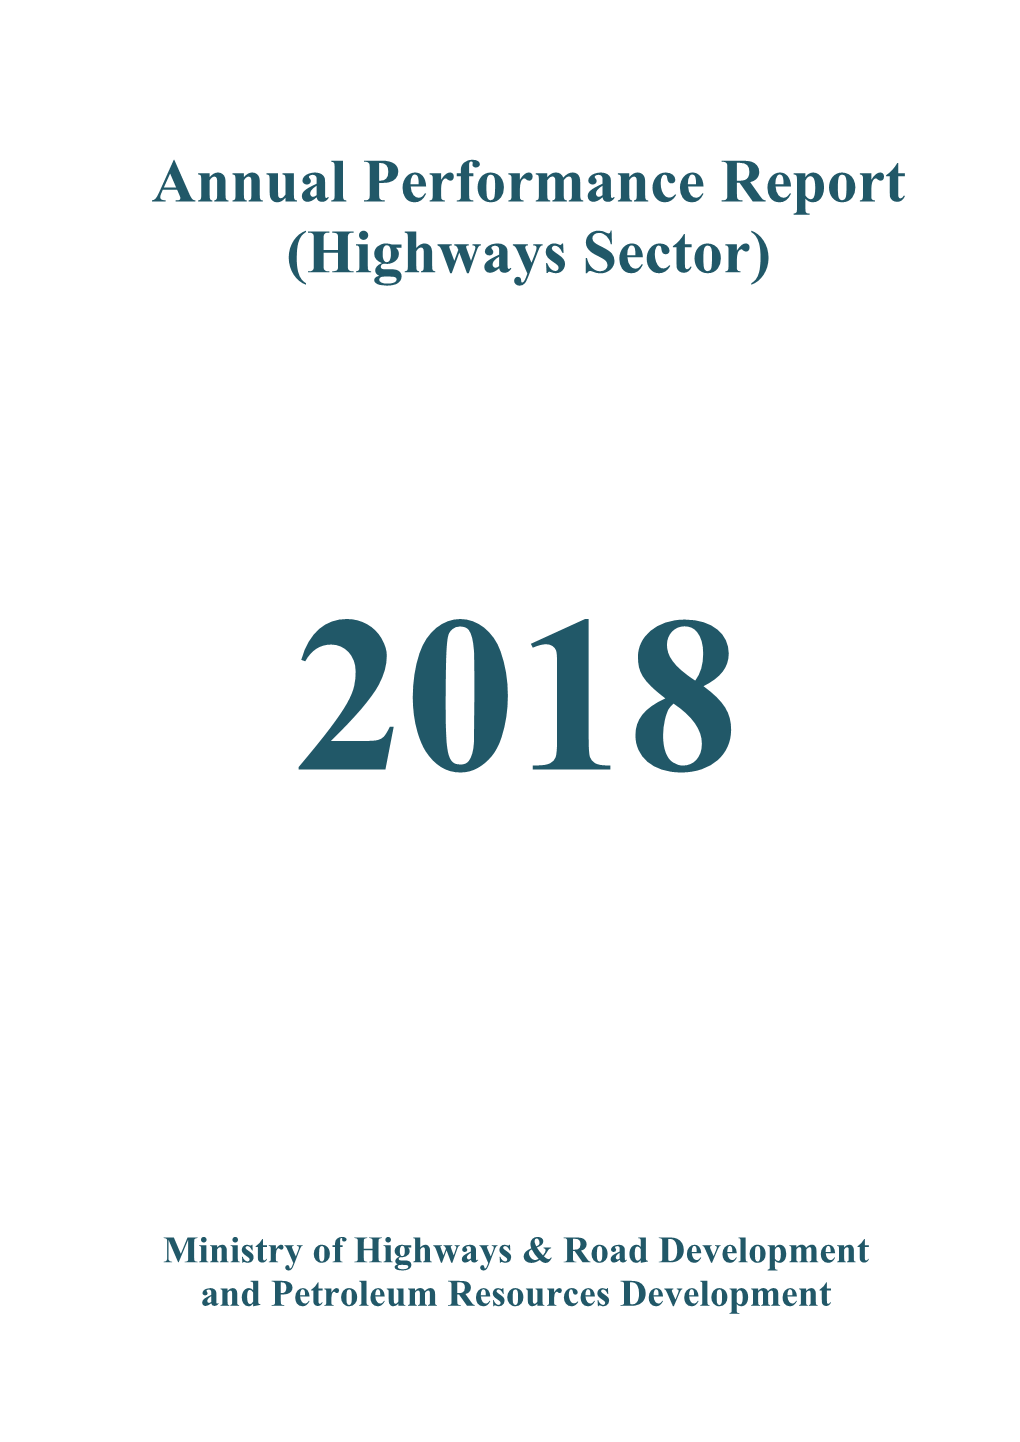 Annual Performance Report (Highways Sector)